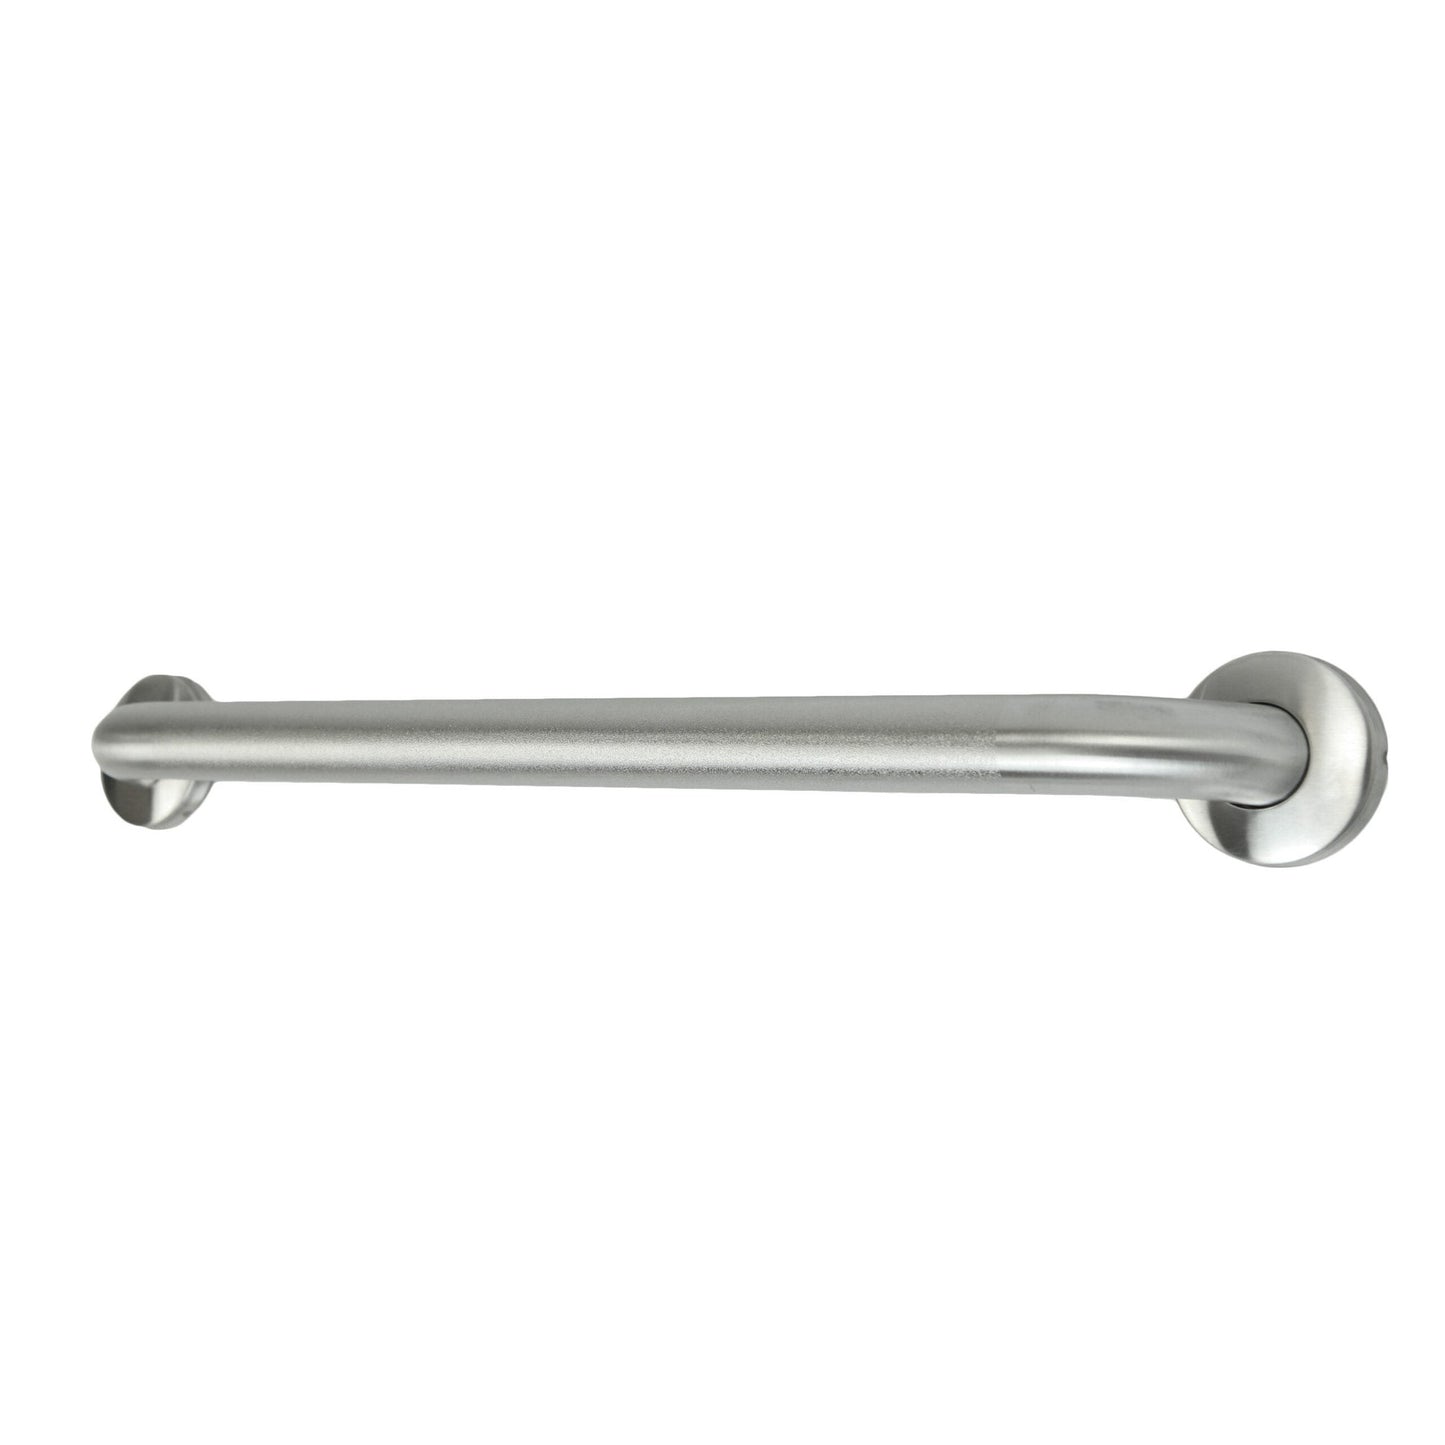 Frost 1001NP Wall Mounted 30" Brushed Stainless Steel Grab Bar